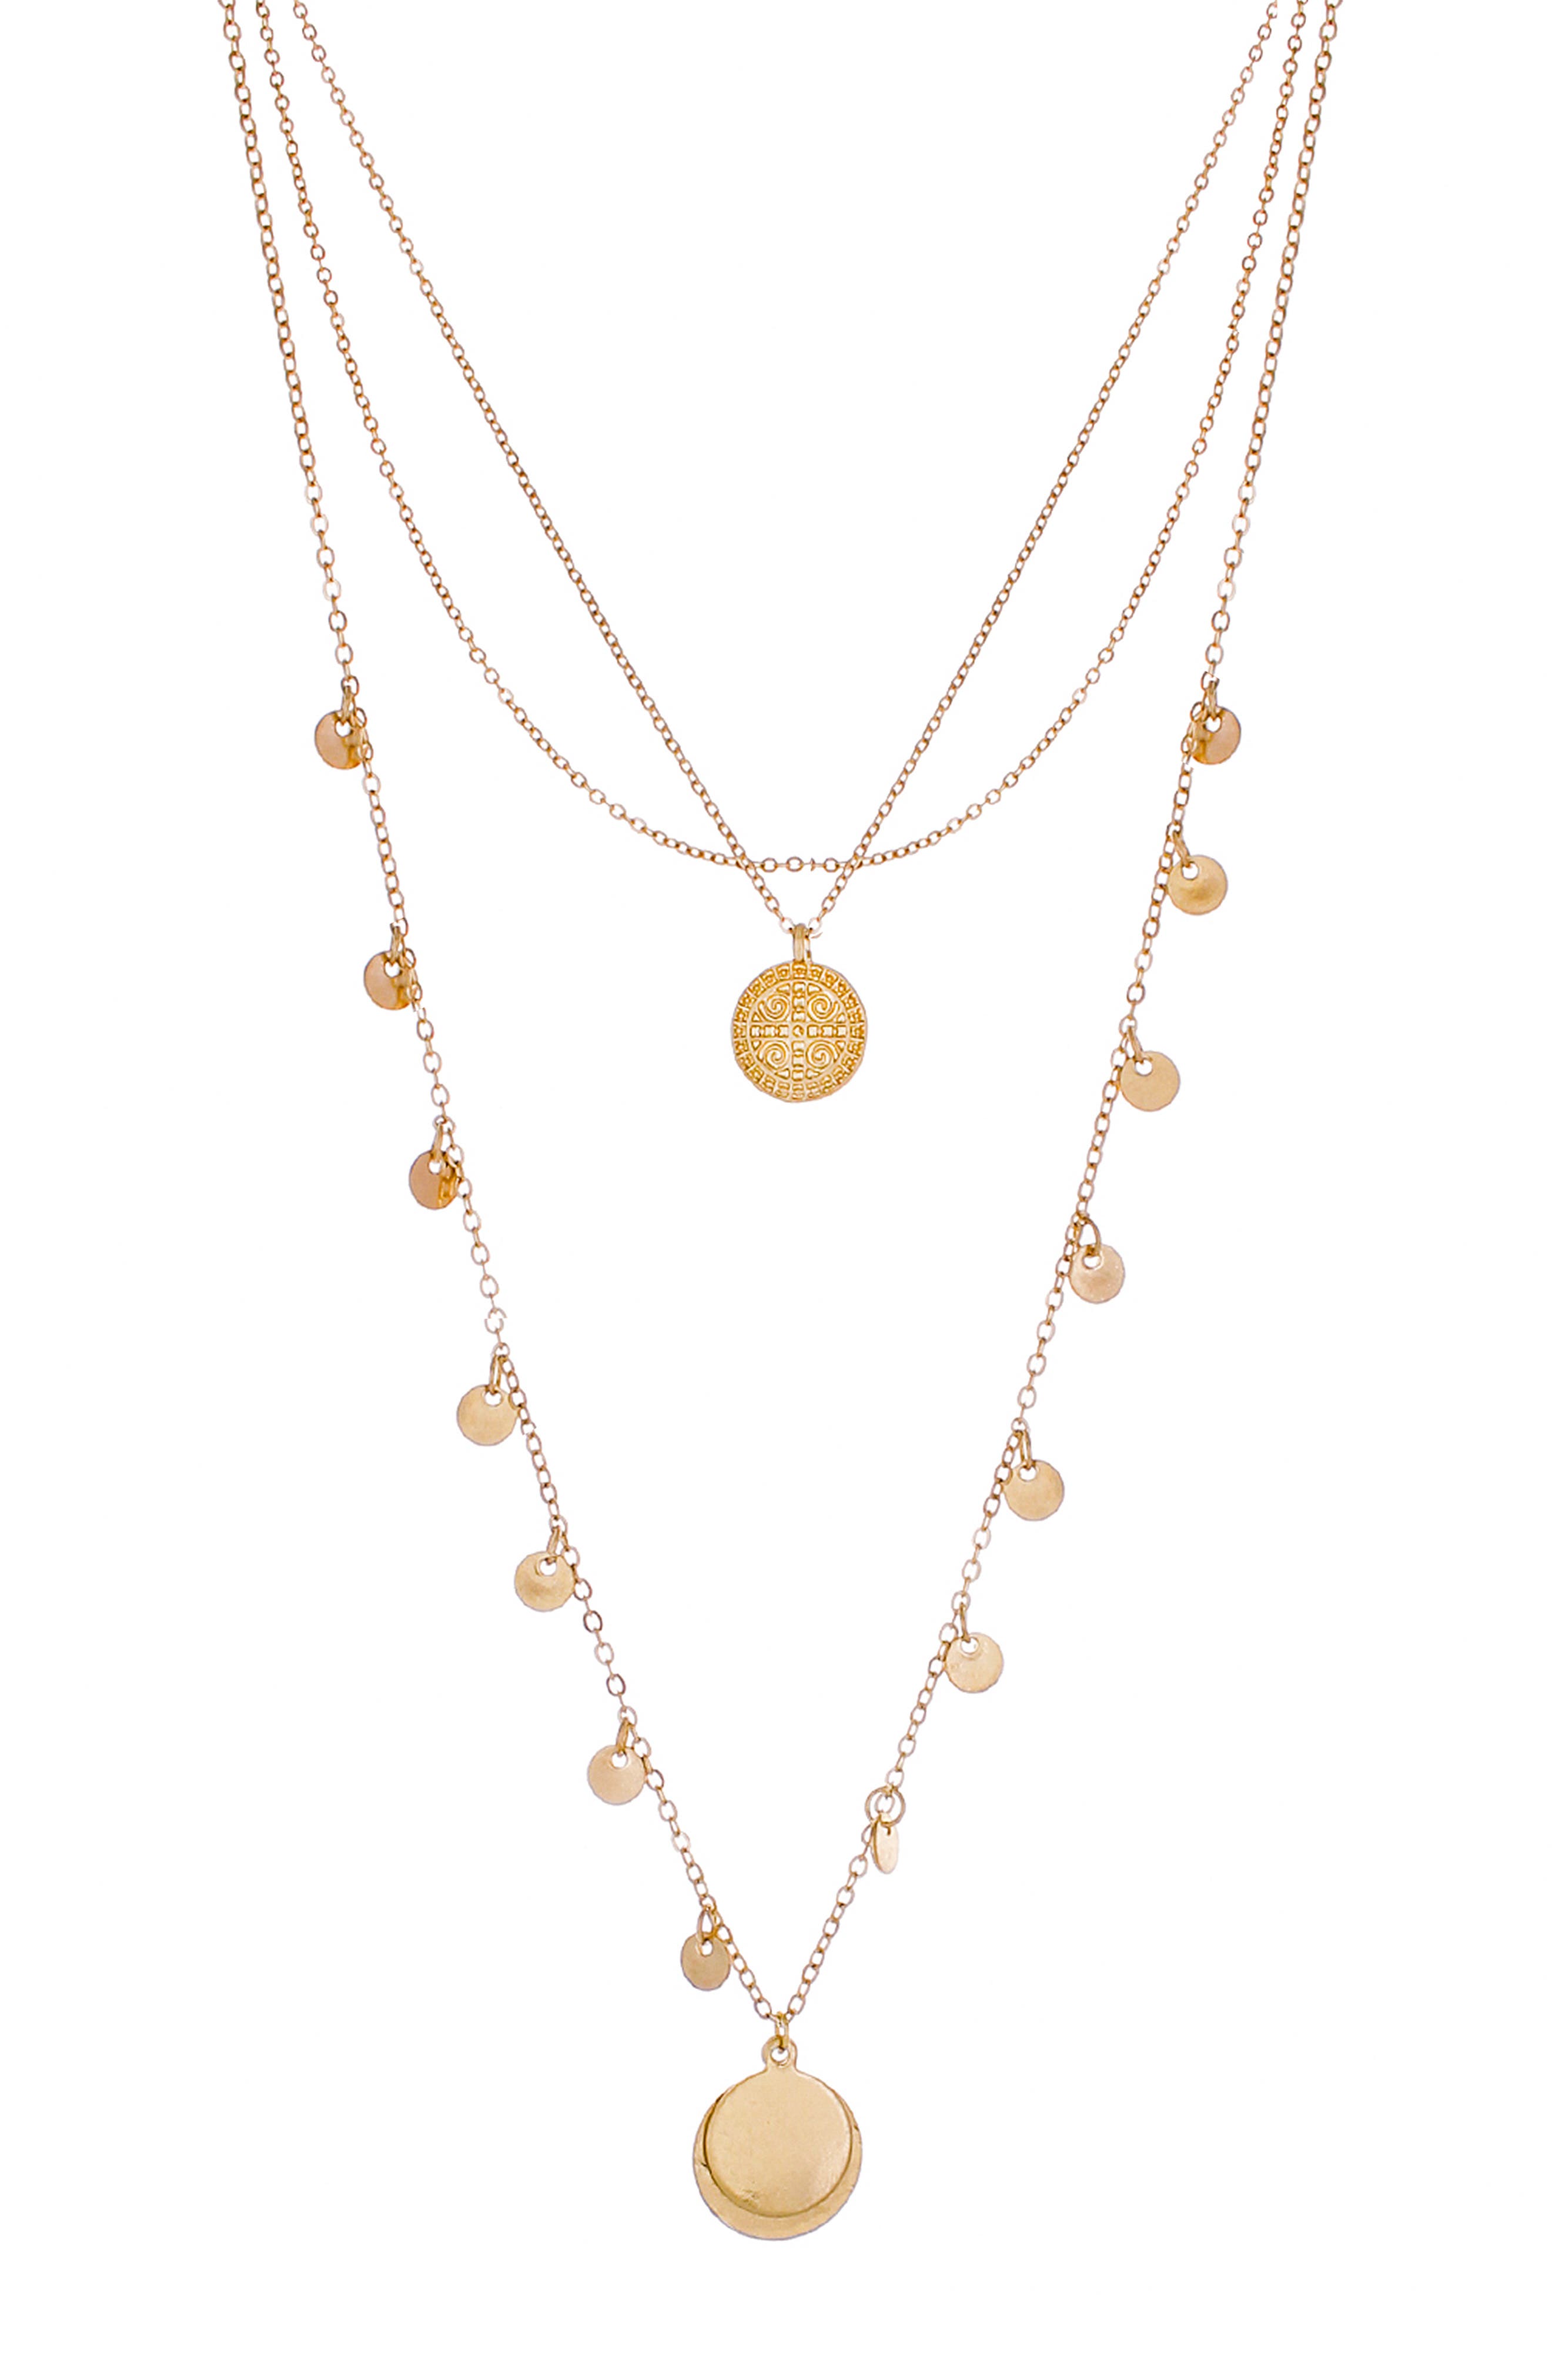 star pendant flow su multi-layer necklace gold necklace